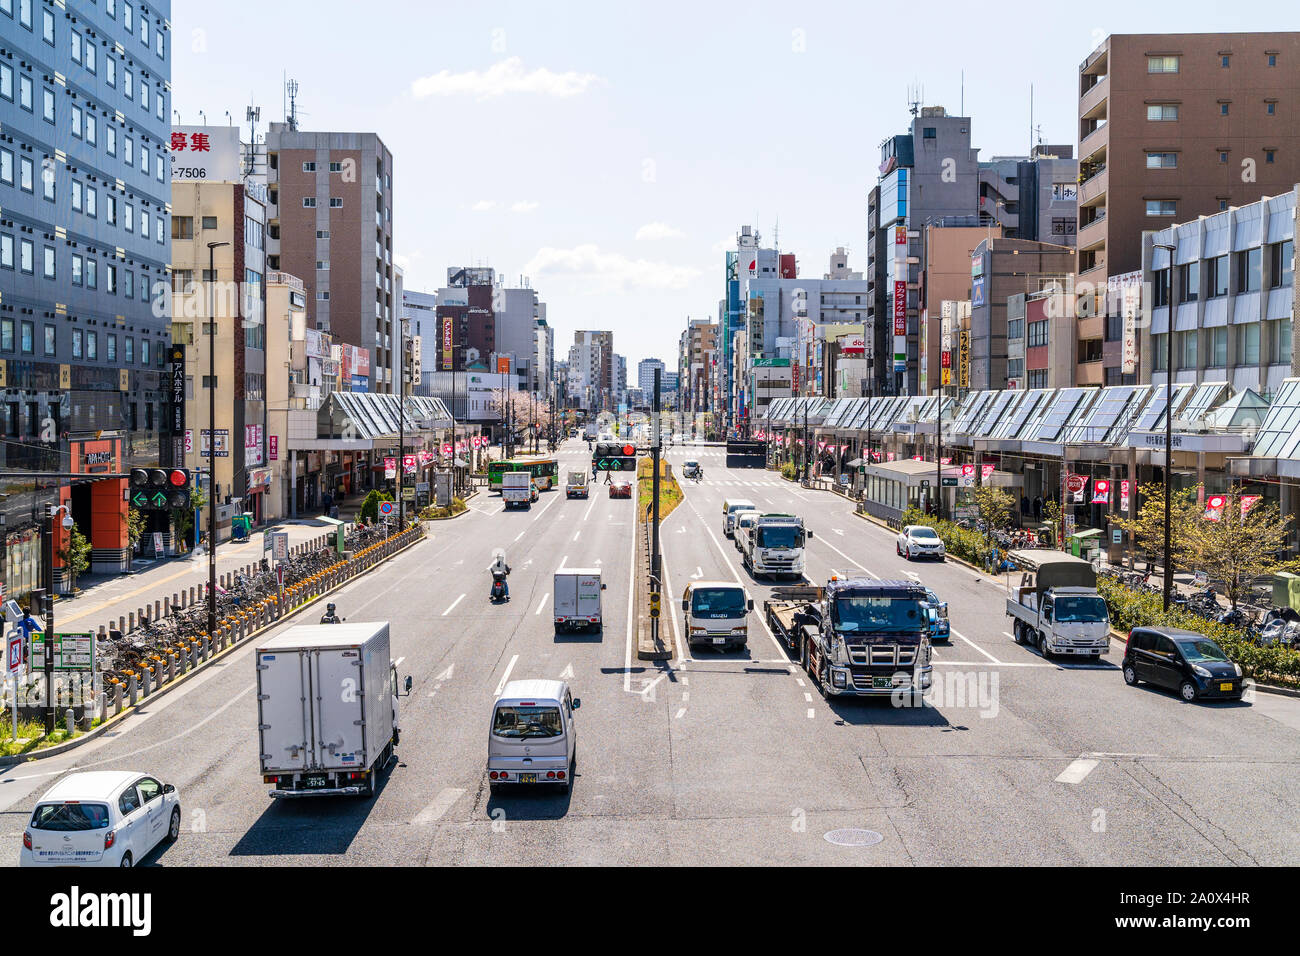 Main route, street through Sugamo town in Tokyo, Japan. View along street busy with traffic from overhead bridge. Buildings on either side. Stock Photo